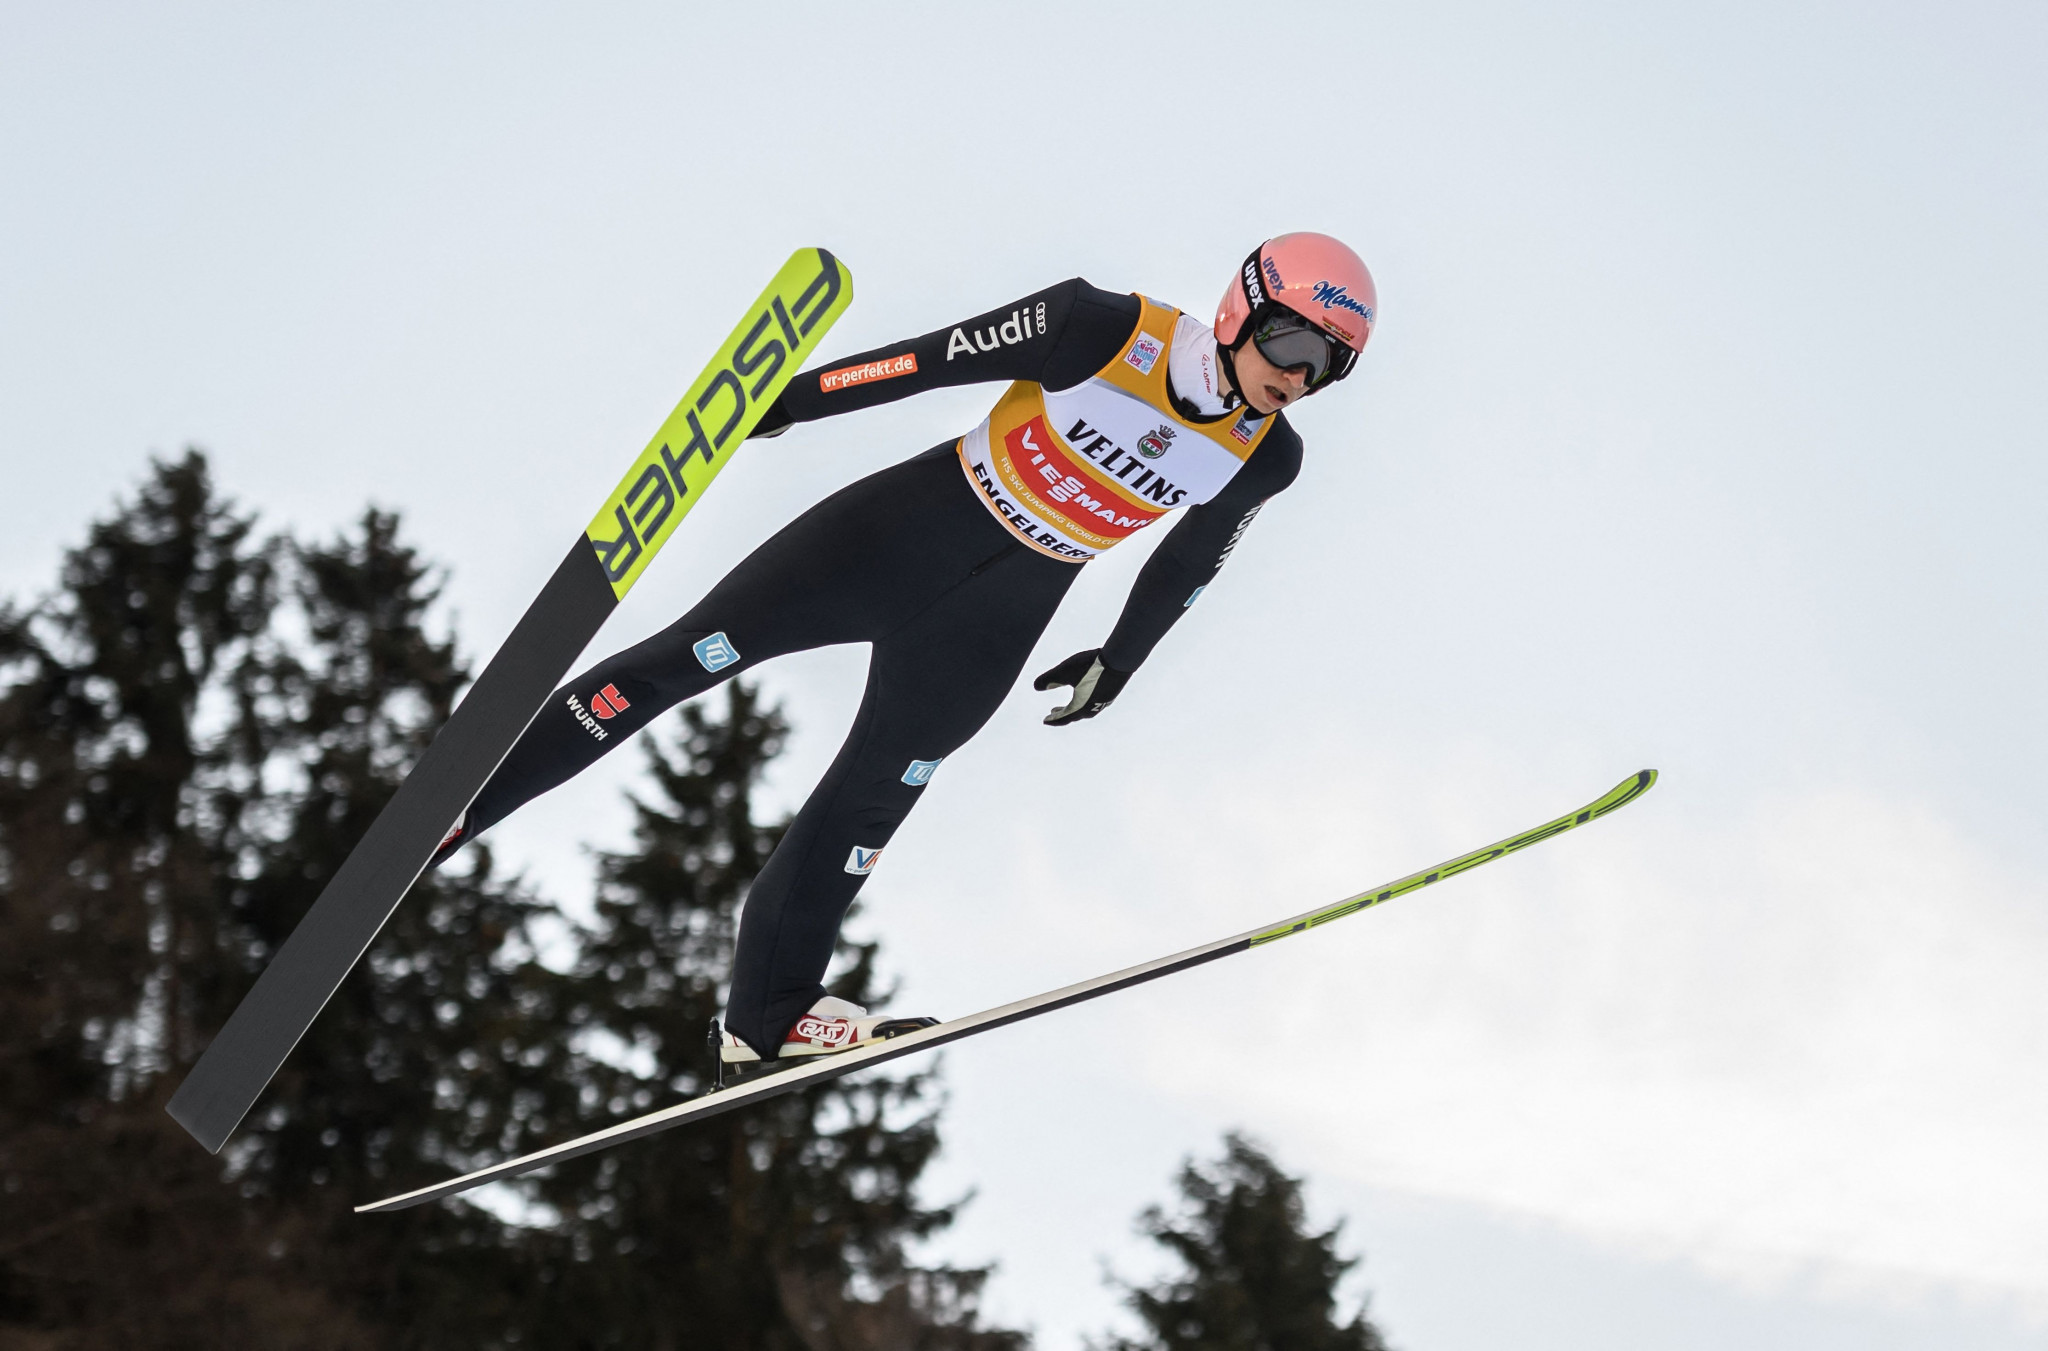 Geiger extends lead in FIS Ski Jumping World Cup overall standings with Engelberg win